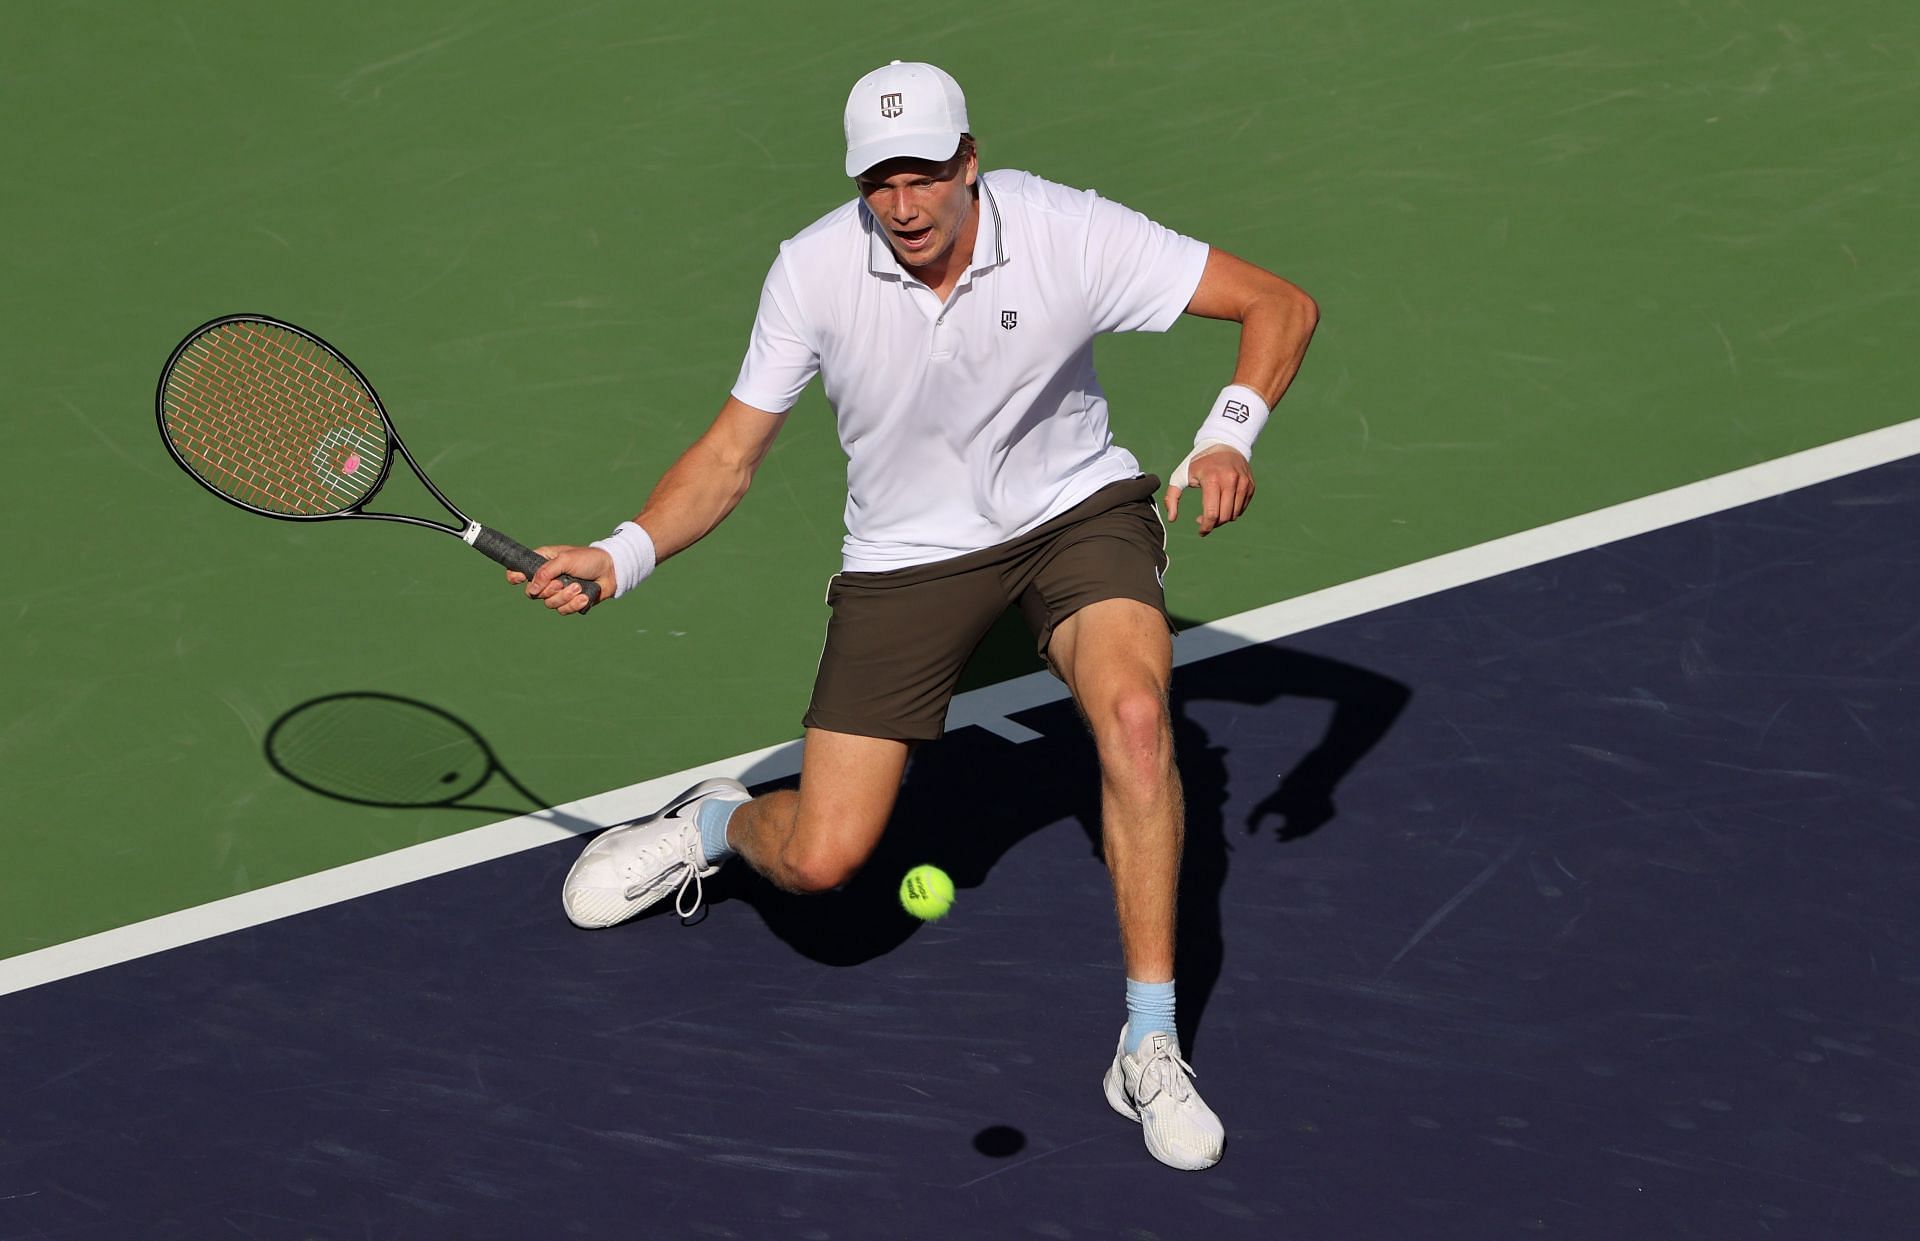 Jenson Brooksby at the 2021 Indian Wells Open